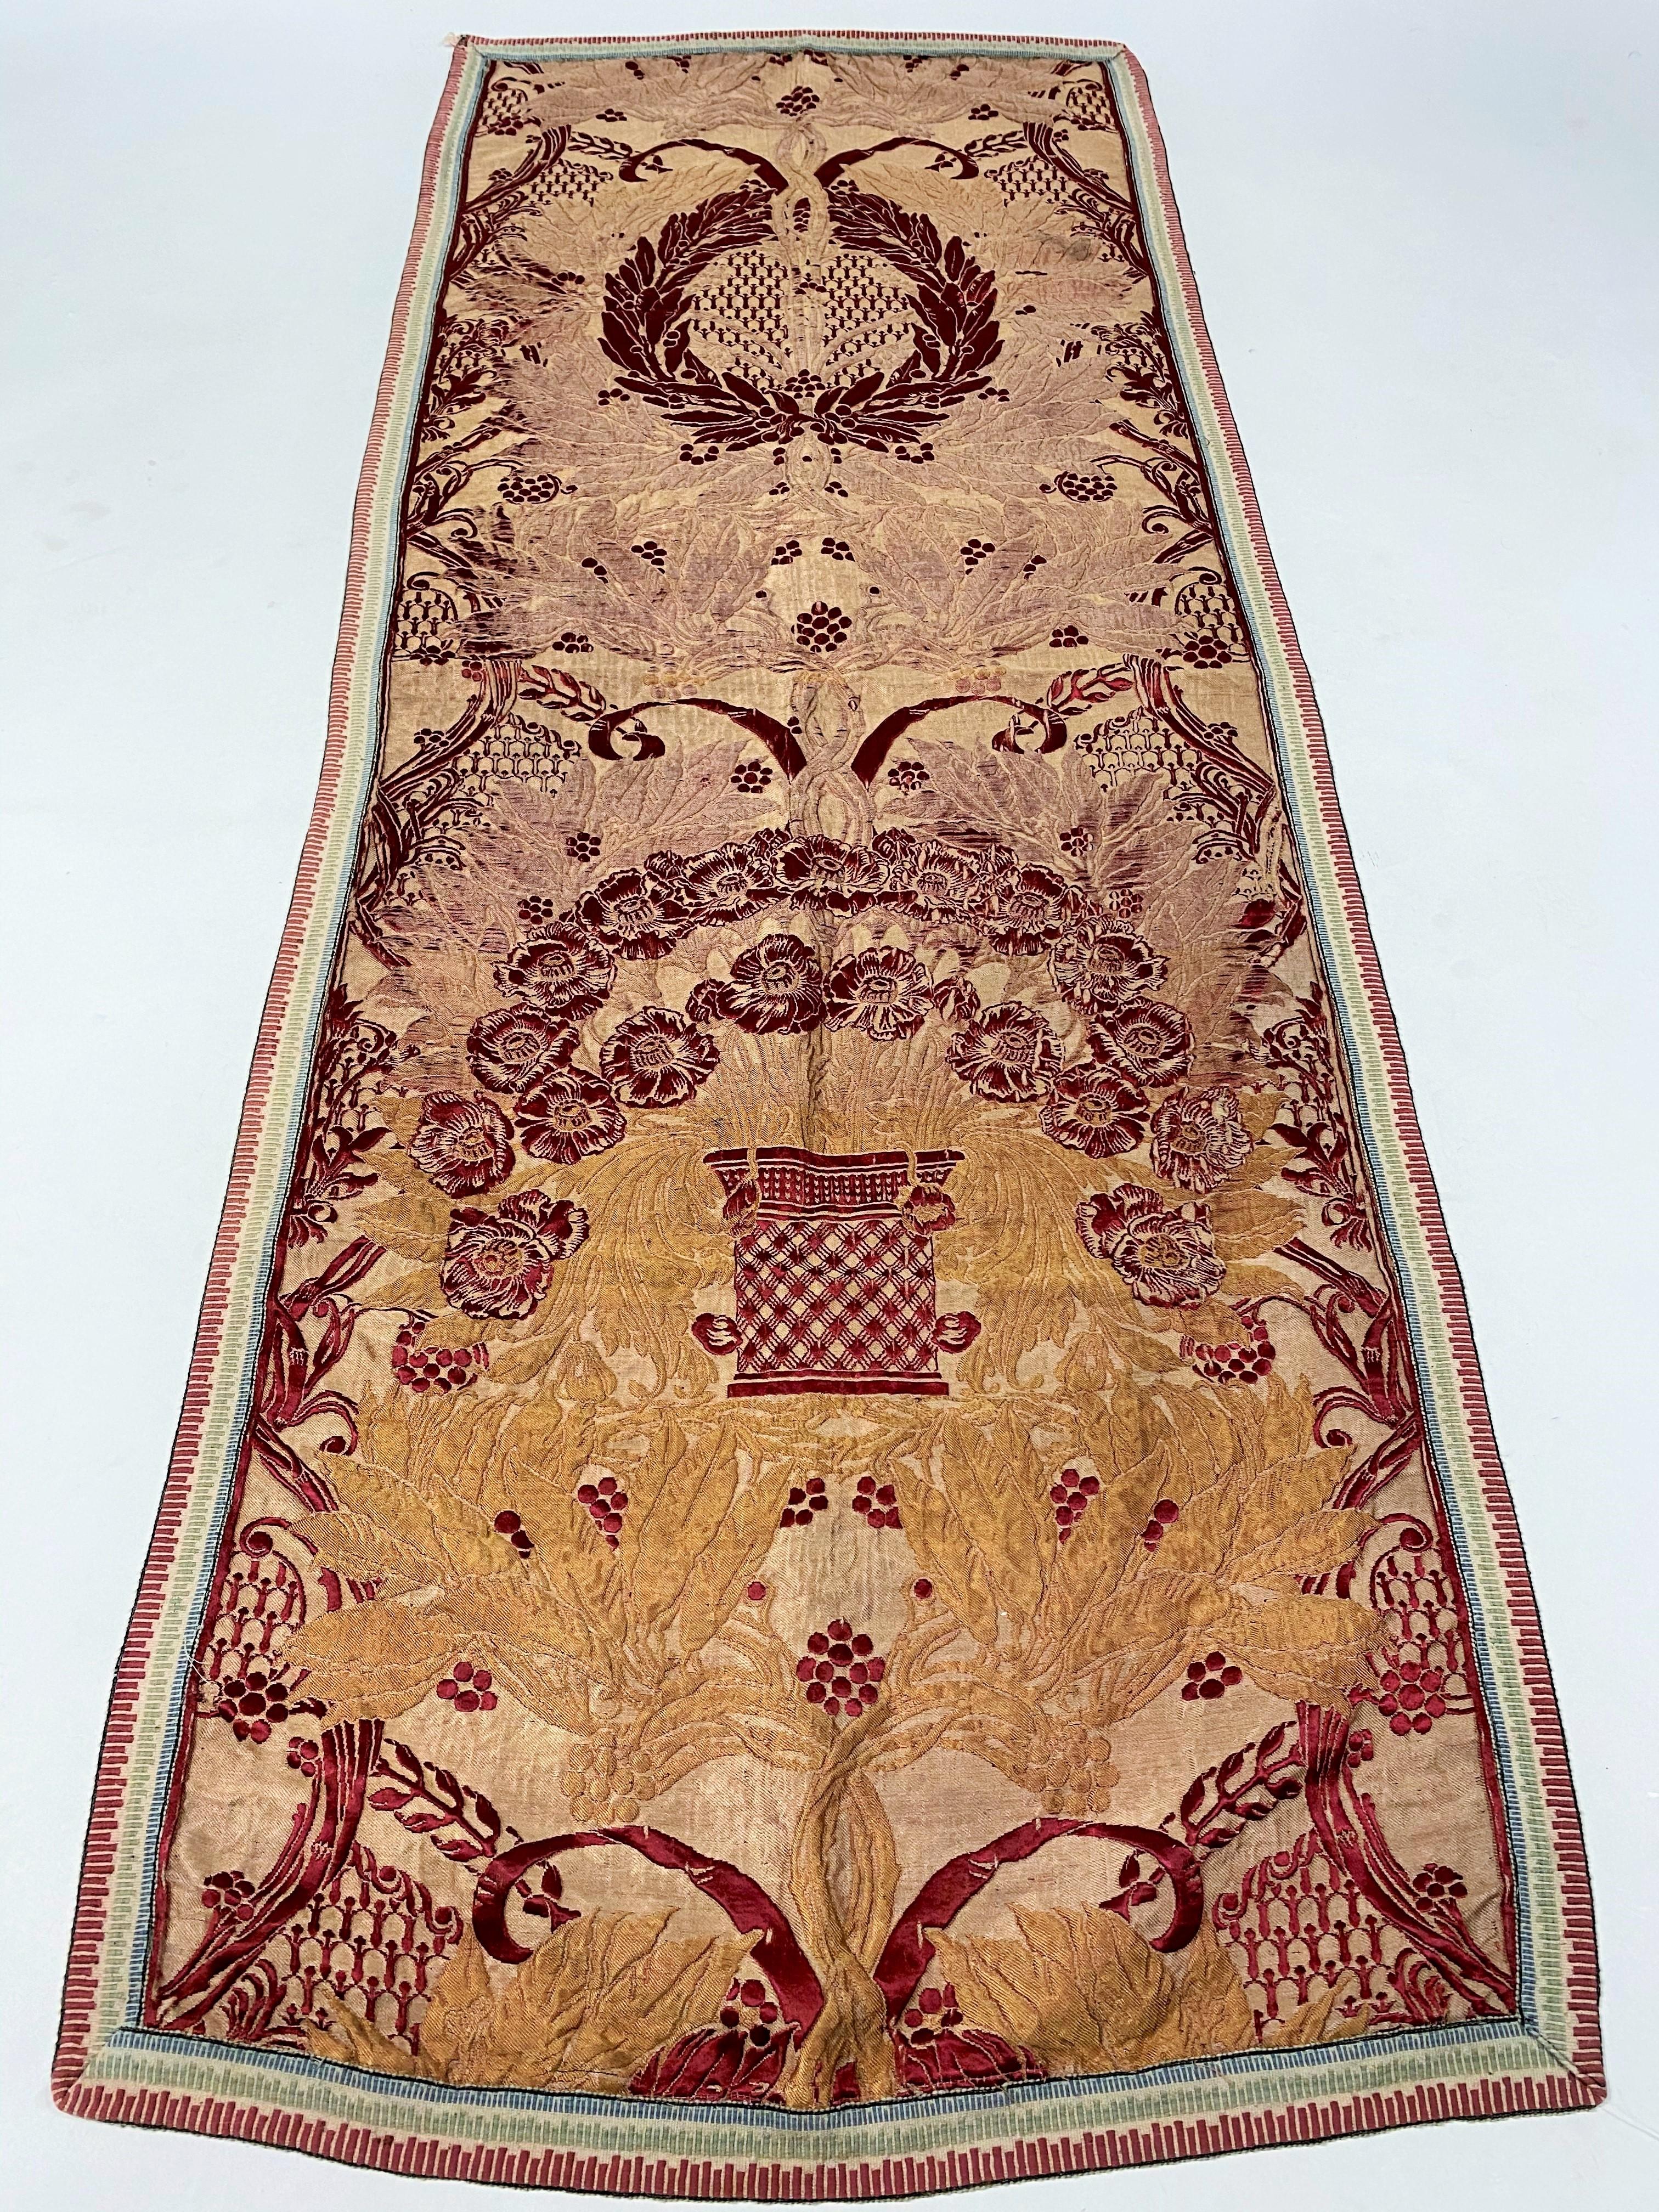 A French Art Nouveau Brocaded Silk by Adrien Karbowsky - Tassinari & Chatel 1899 In Good Condition For Sale In Toulon, FR